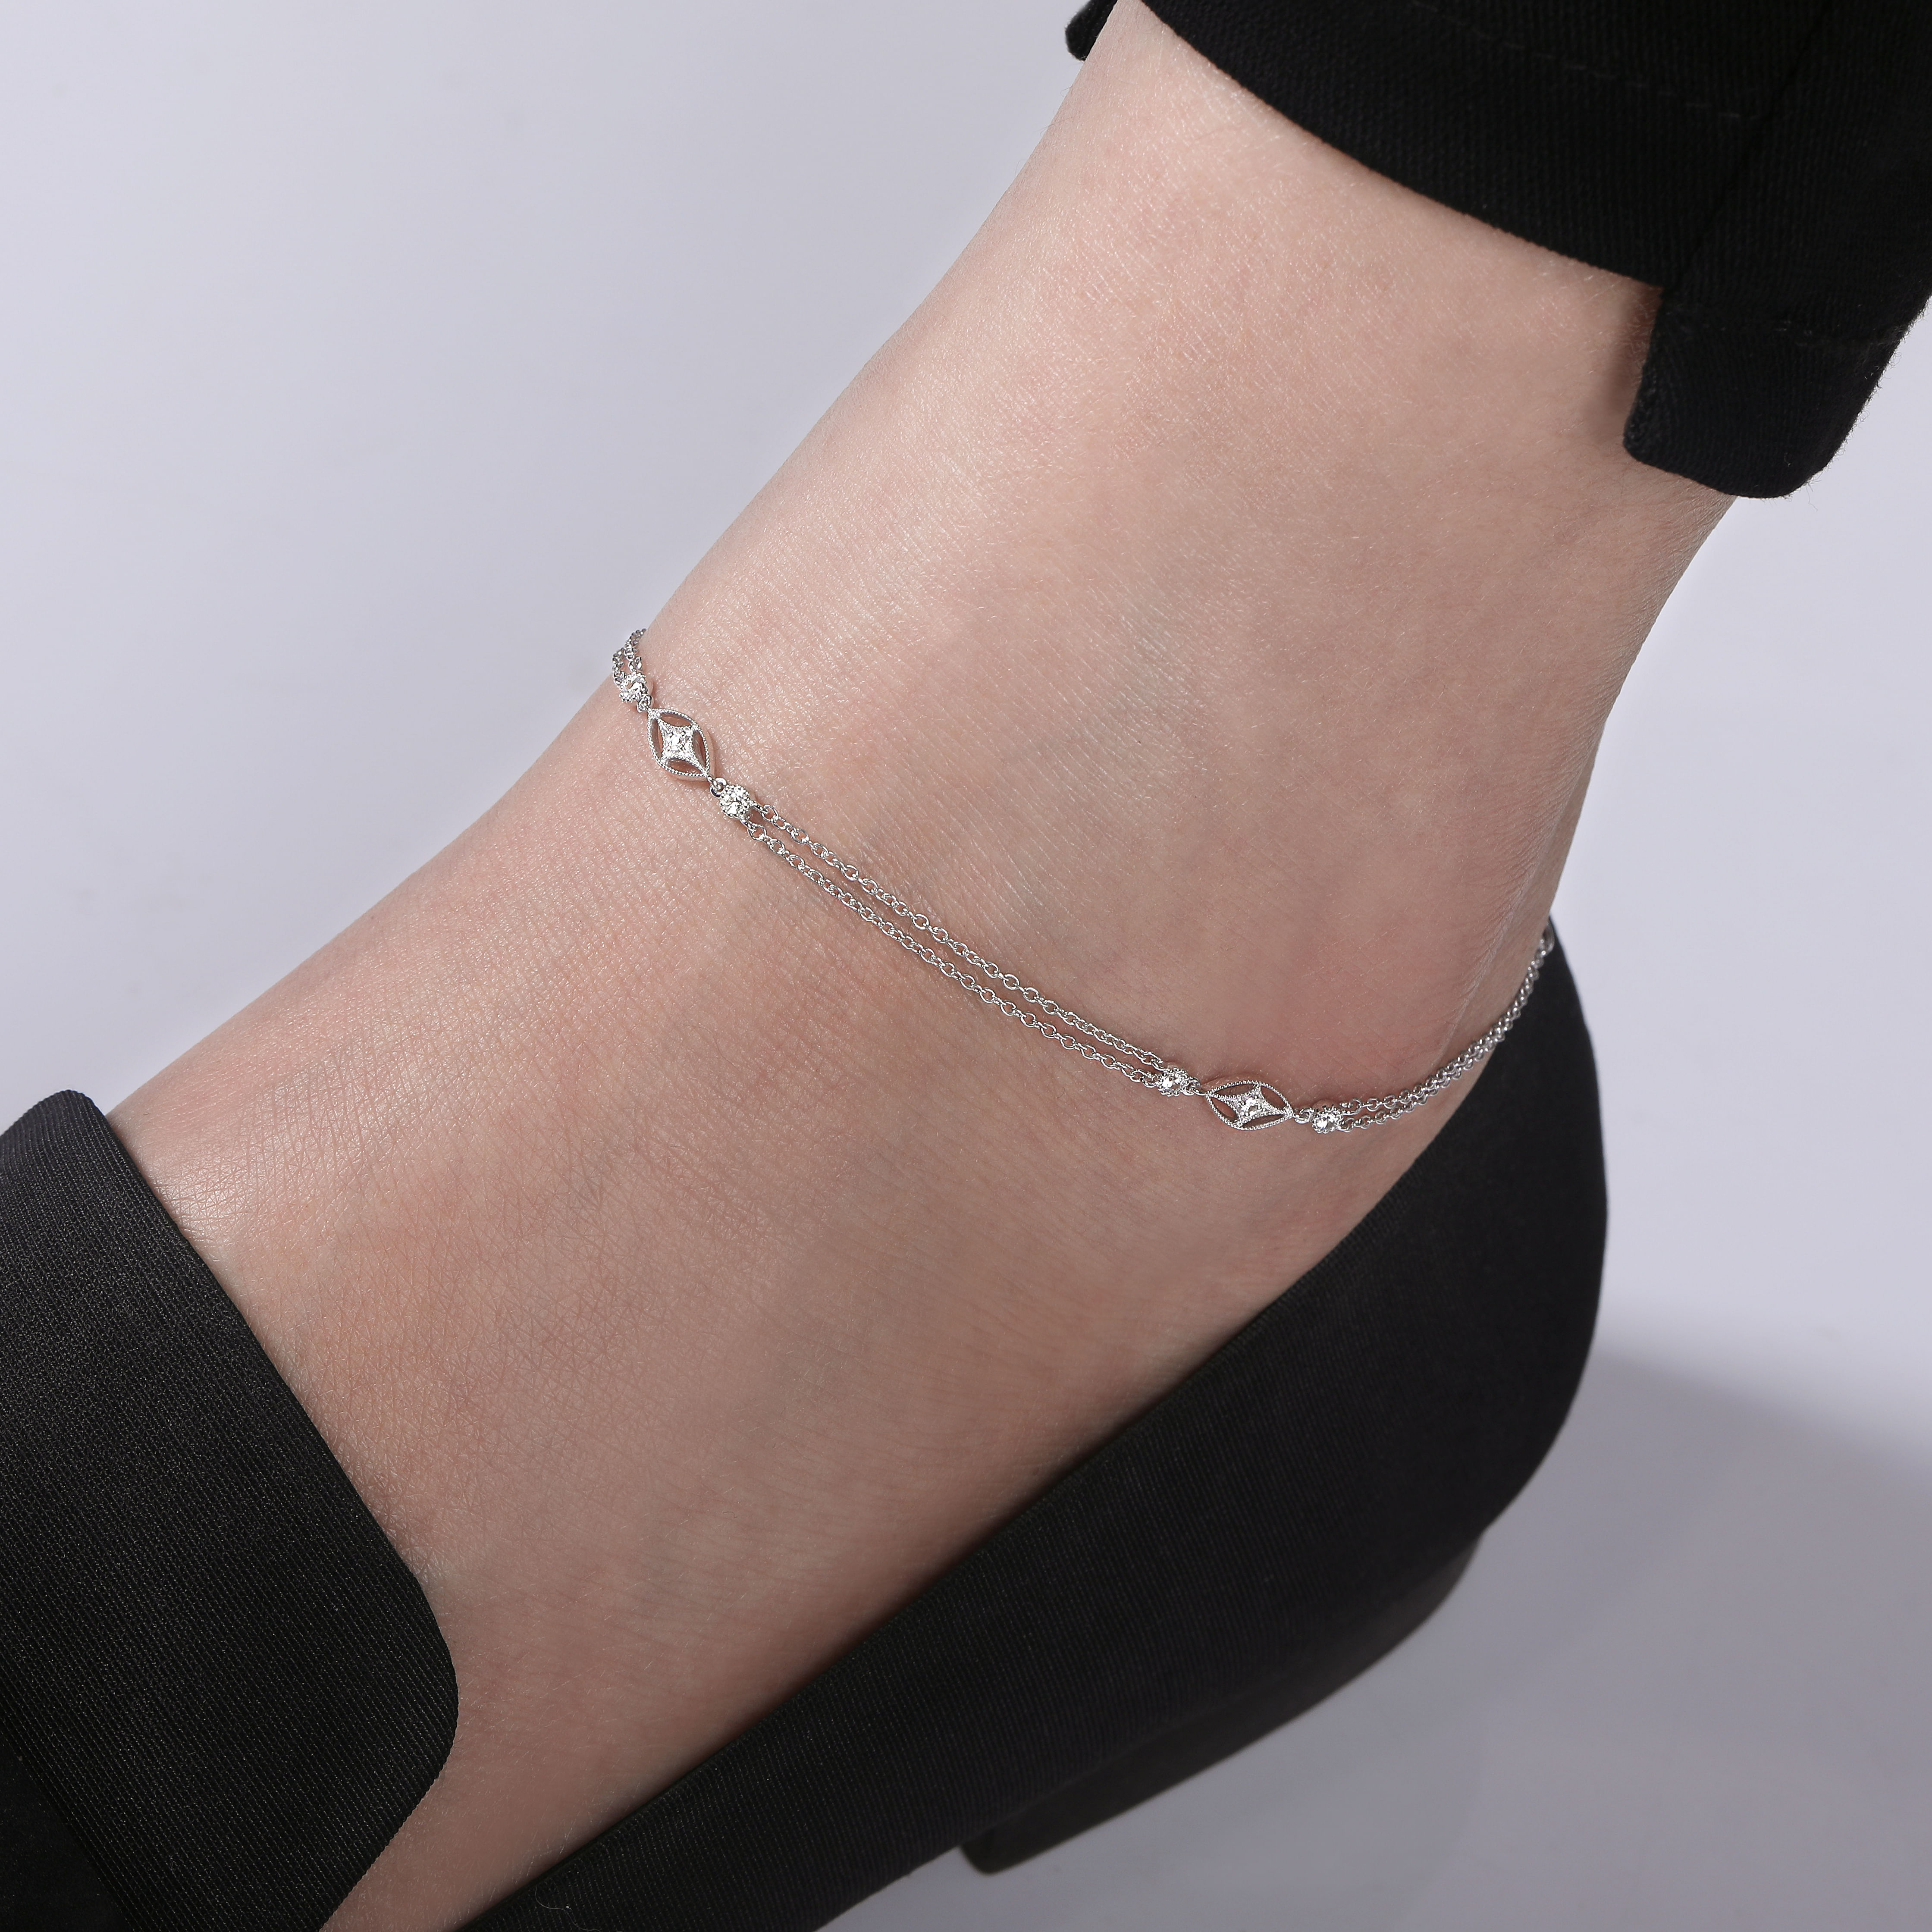 Multi Row 925 Sterling Silver Chain Ankle Bracelet with White Sapphire Marquise Stations